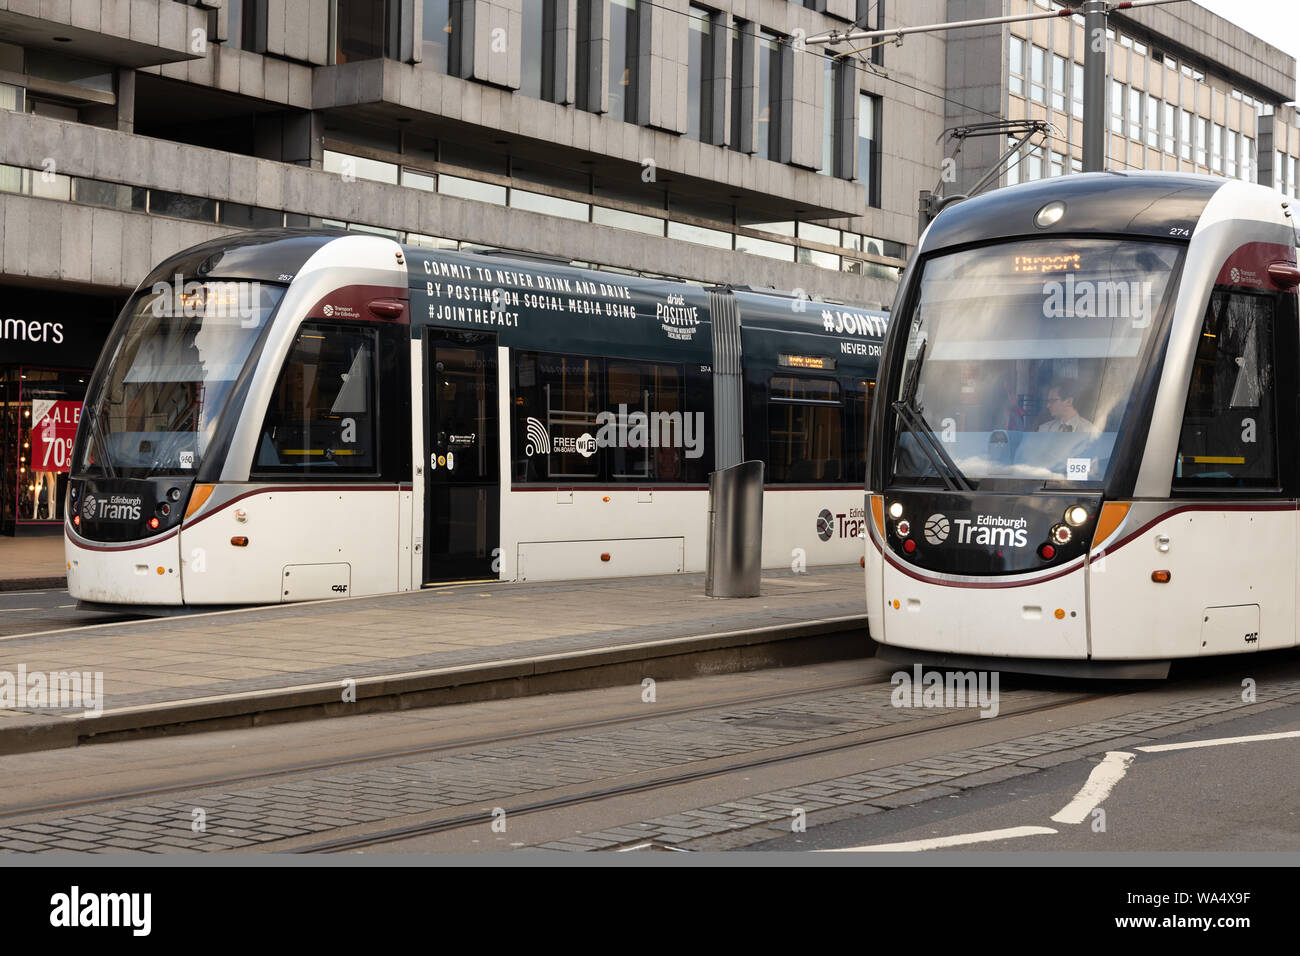 Edinburgh Trams is a tramway in Edinburgh, Scotland, operated by Transport for Edinburgh. It is a 14-kilometre (8.7 mi) line between York Place in New Stock Photo